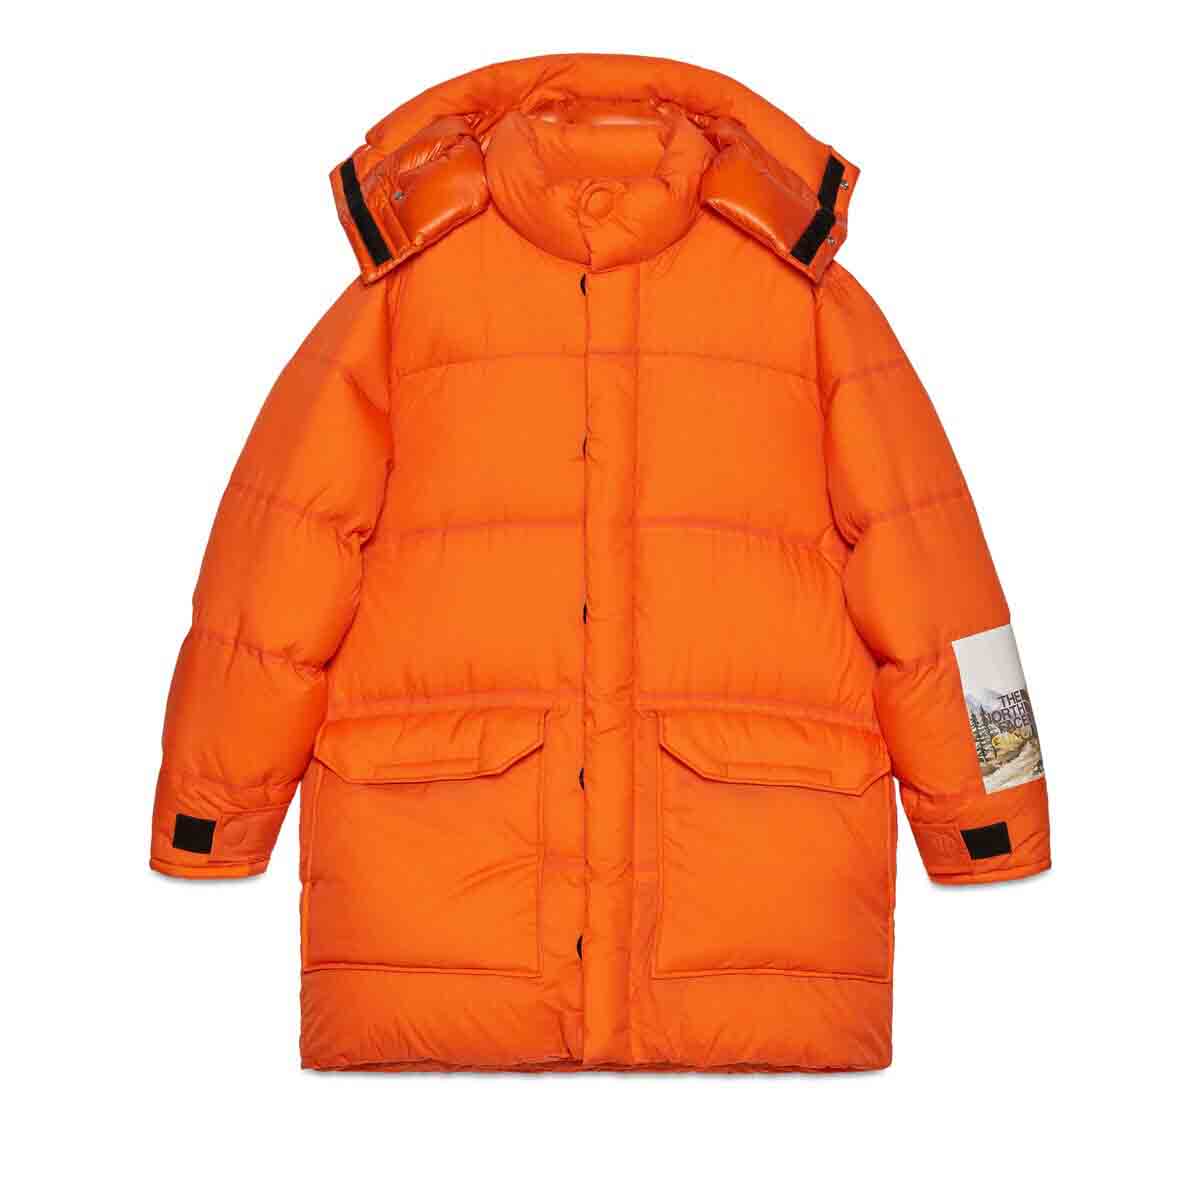 Gucci x The North Face Down Jacket Orange